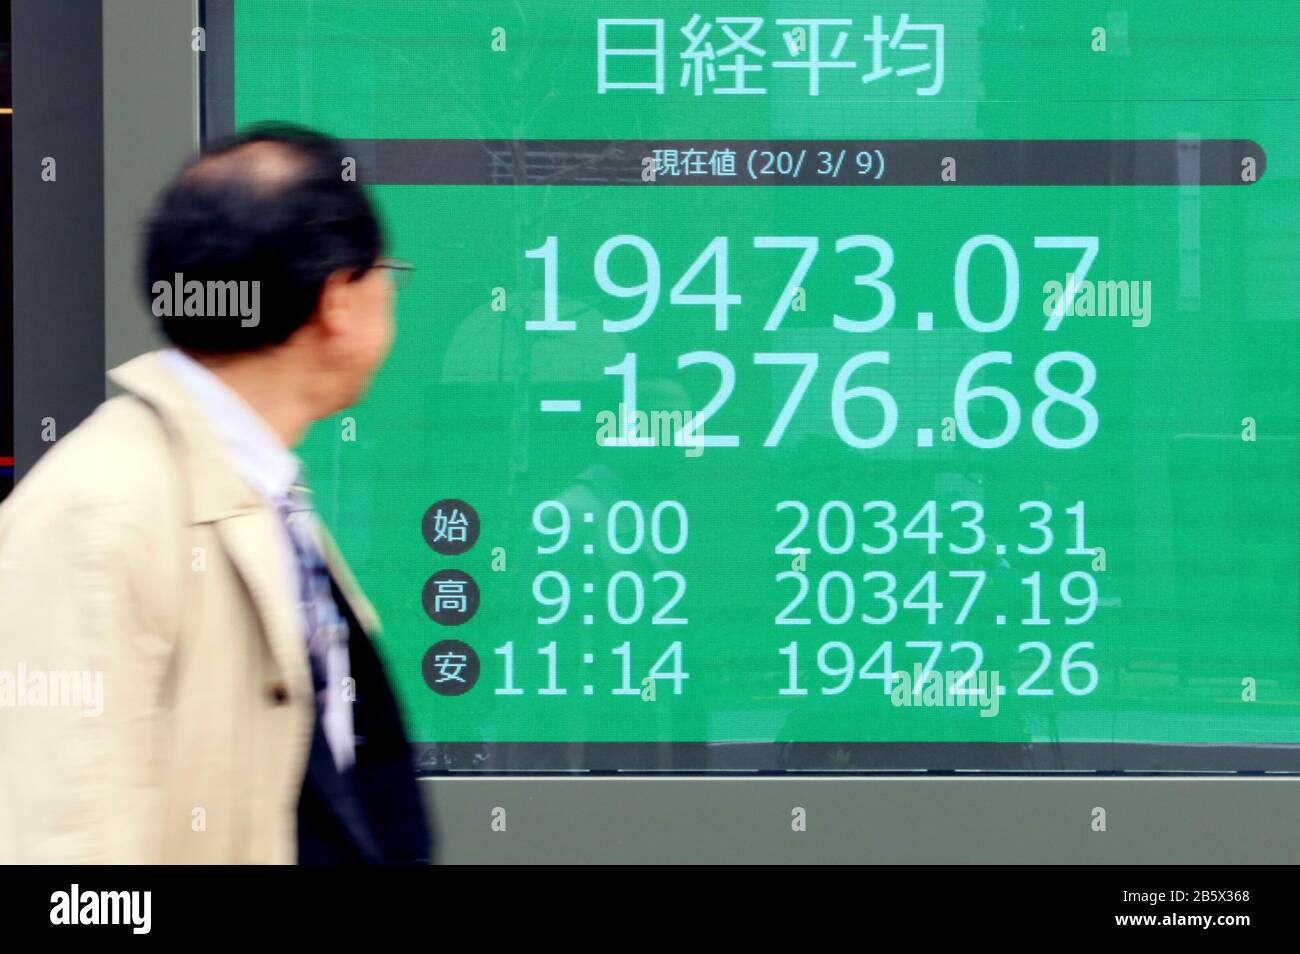 Tokyo, Japan. 9th Mar, 2020. A pedestrian passes before a share prices board in Tokyo on Monday, March 9, 2020. Japan's share prices fell 1,276.68 yen to close at 19,473.07 yen at the morning session of the Tokyo Stock Exchange for the fears of the global economic impact on the coronavirus outbreak. Credit: Yoshio Tsunoda/AFLO/Alamy Live News Stock Photo